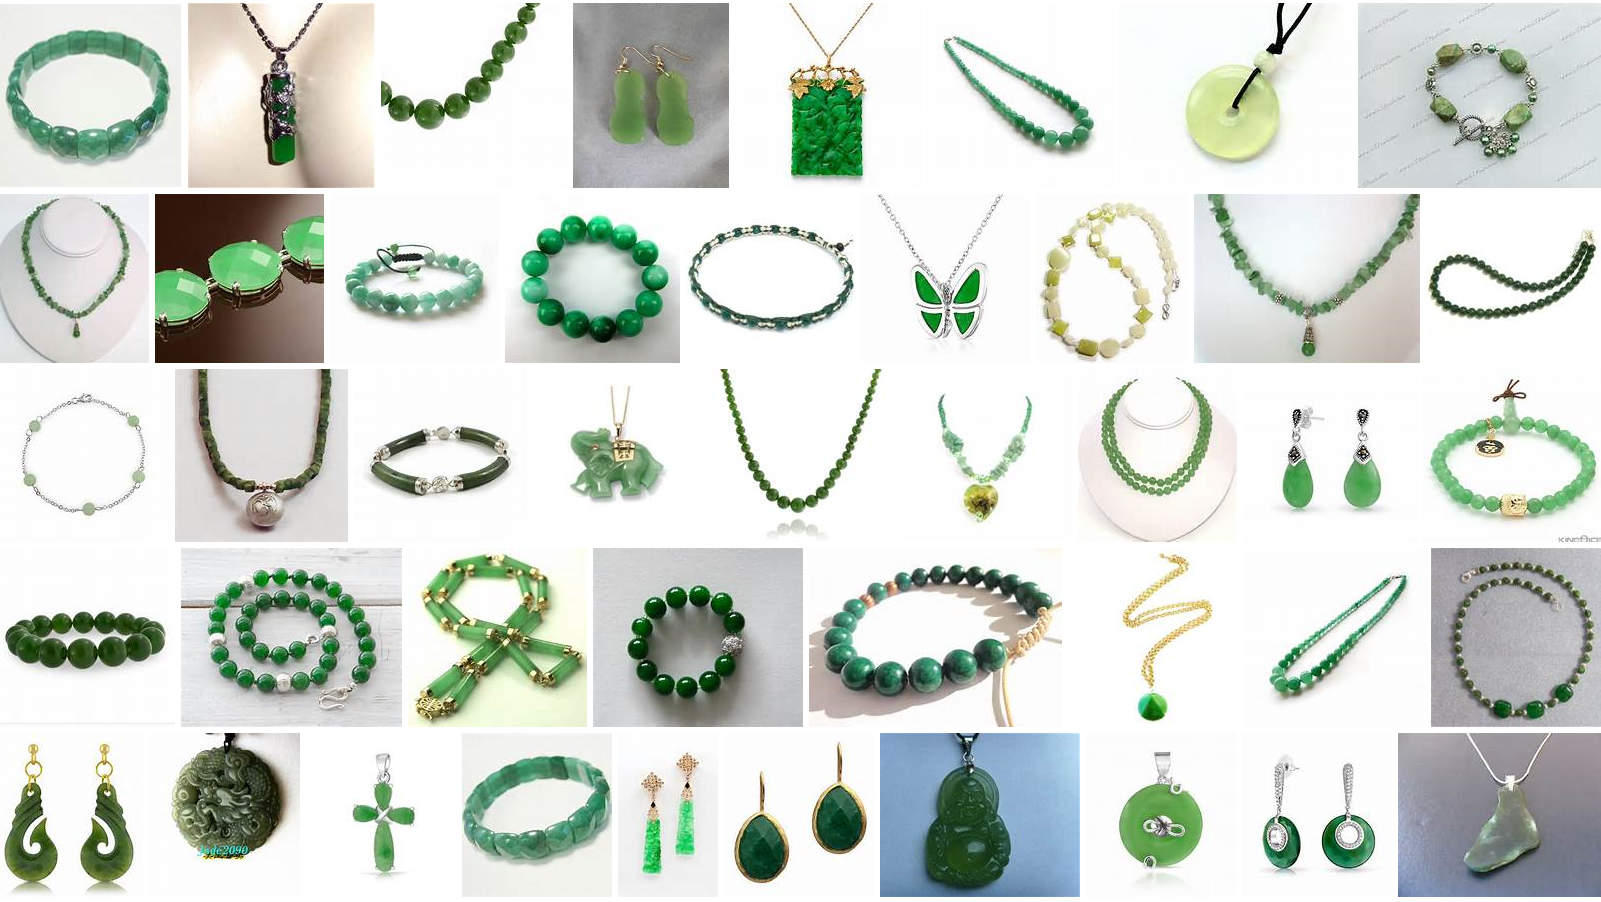 Jade jewelry (photo from a Bing image search).